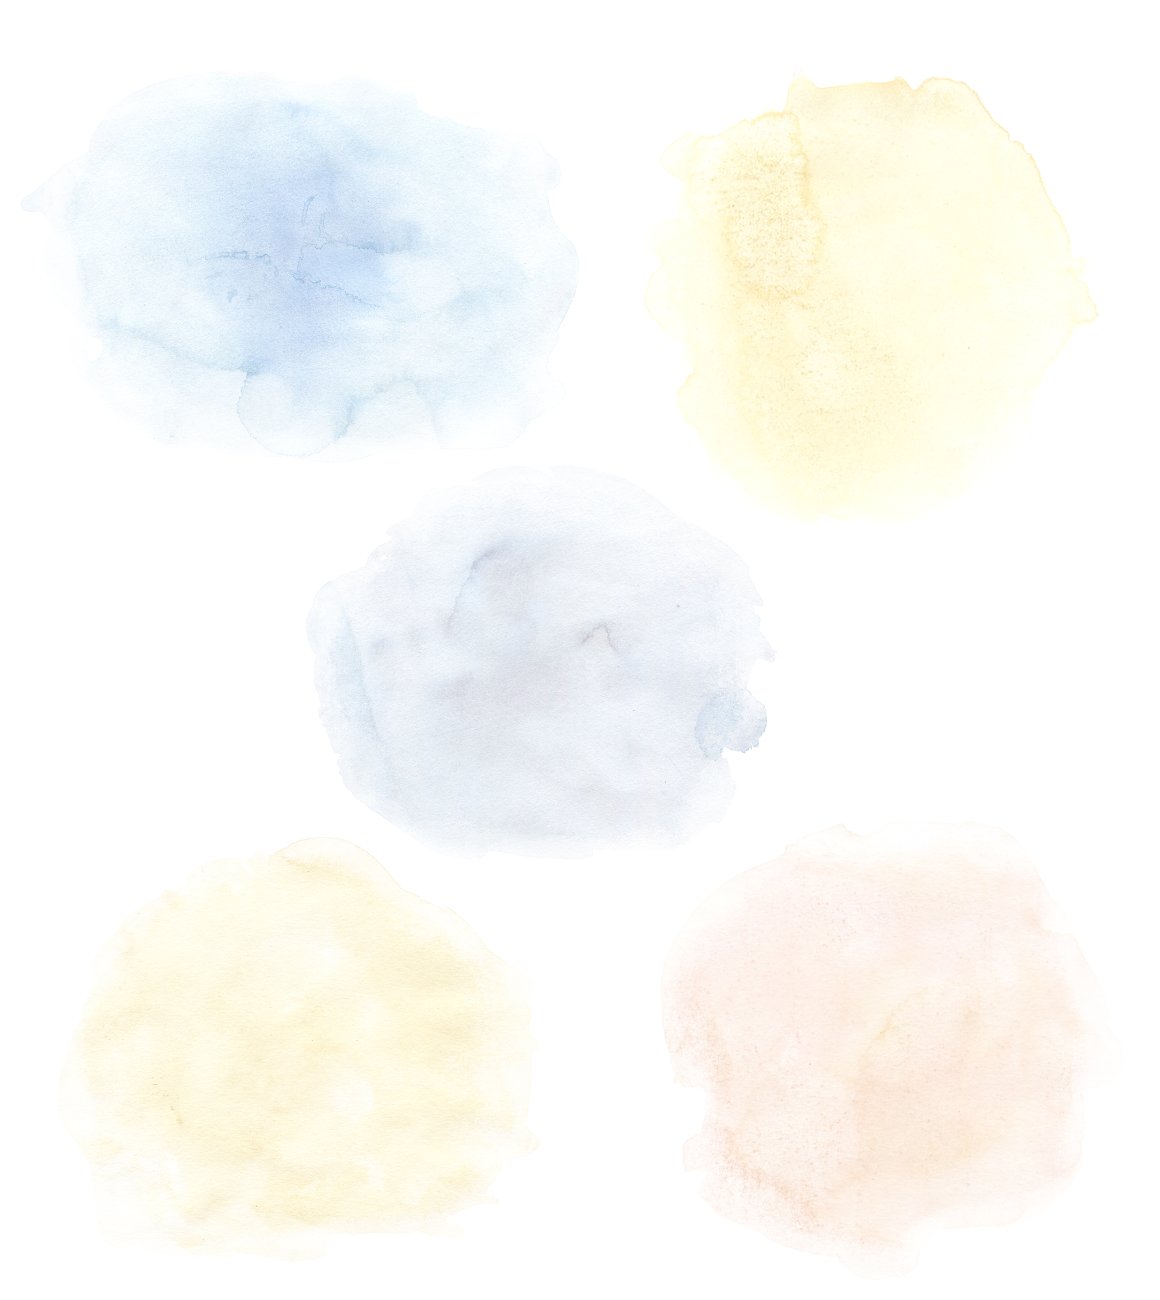 A set of 5 watercolor backgrounds - blue, yellow, purple, orange and pink on a white background.